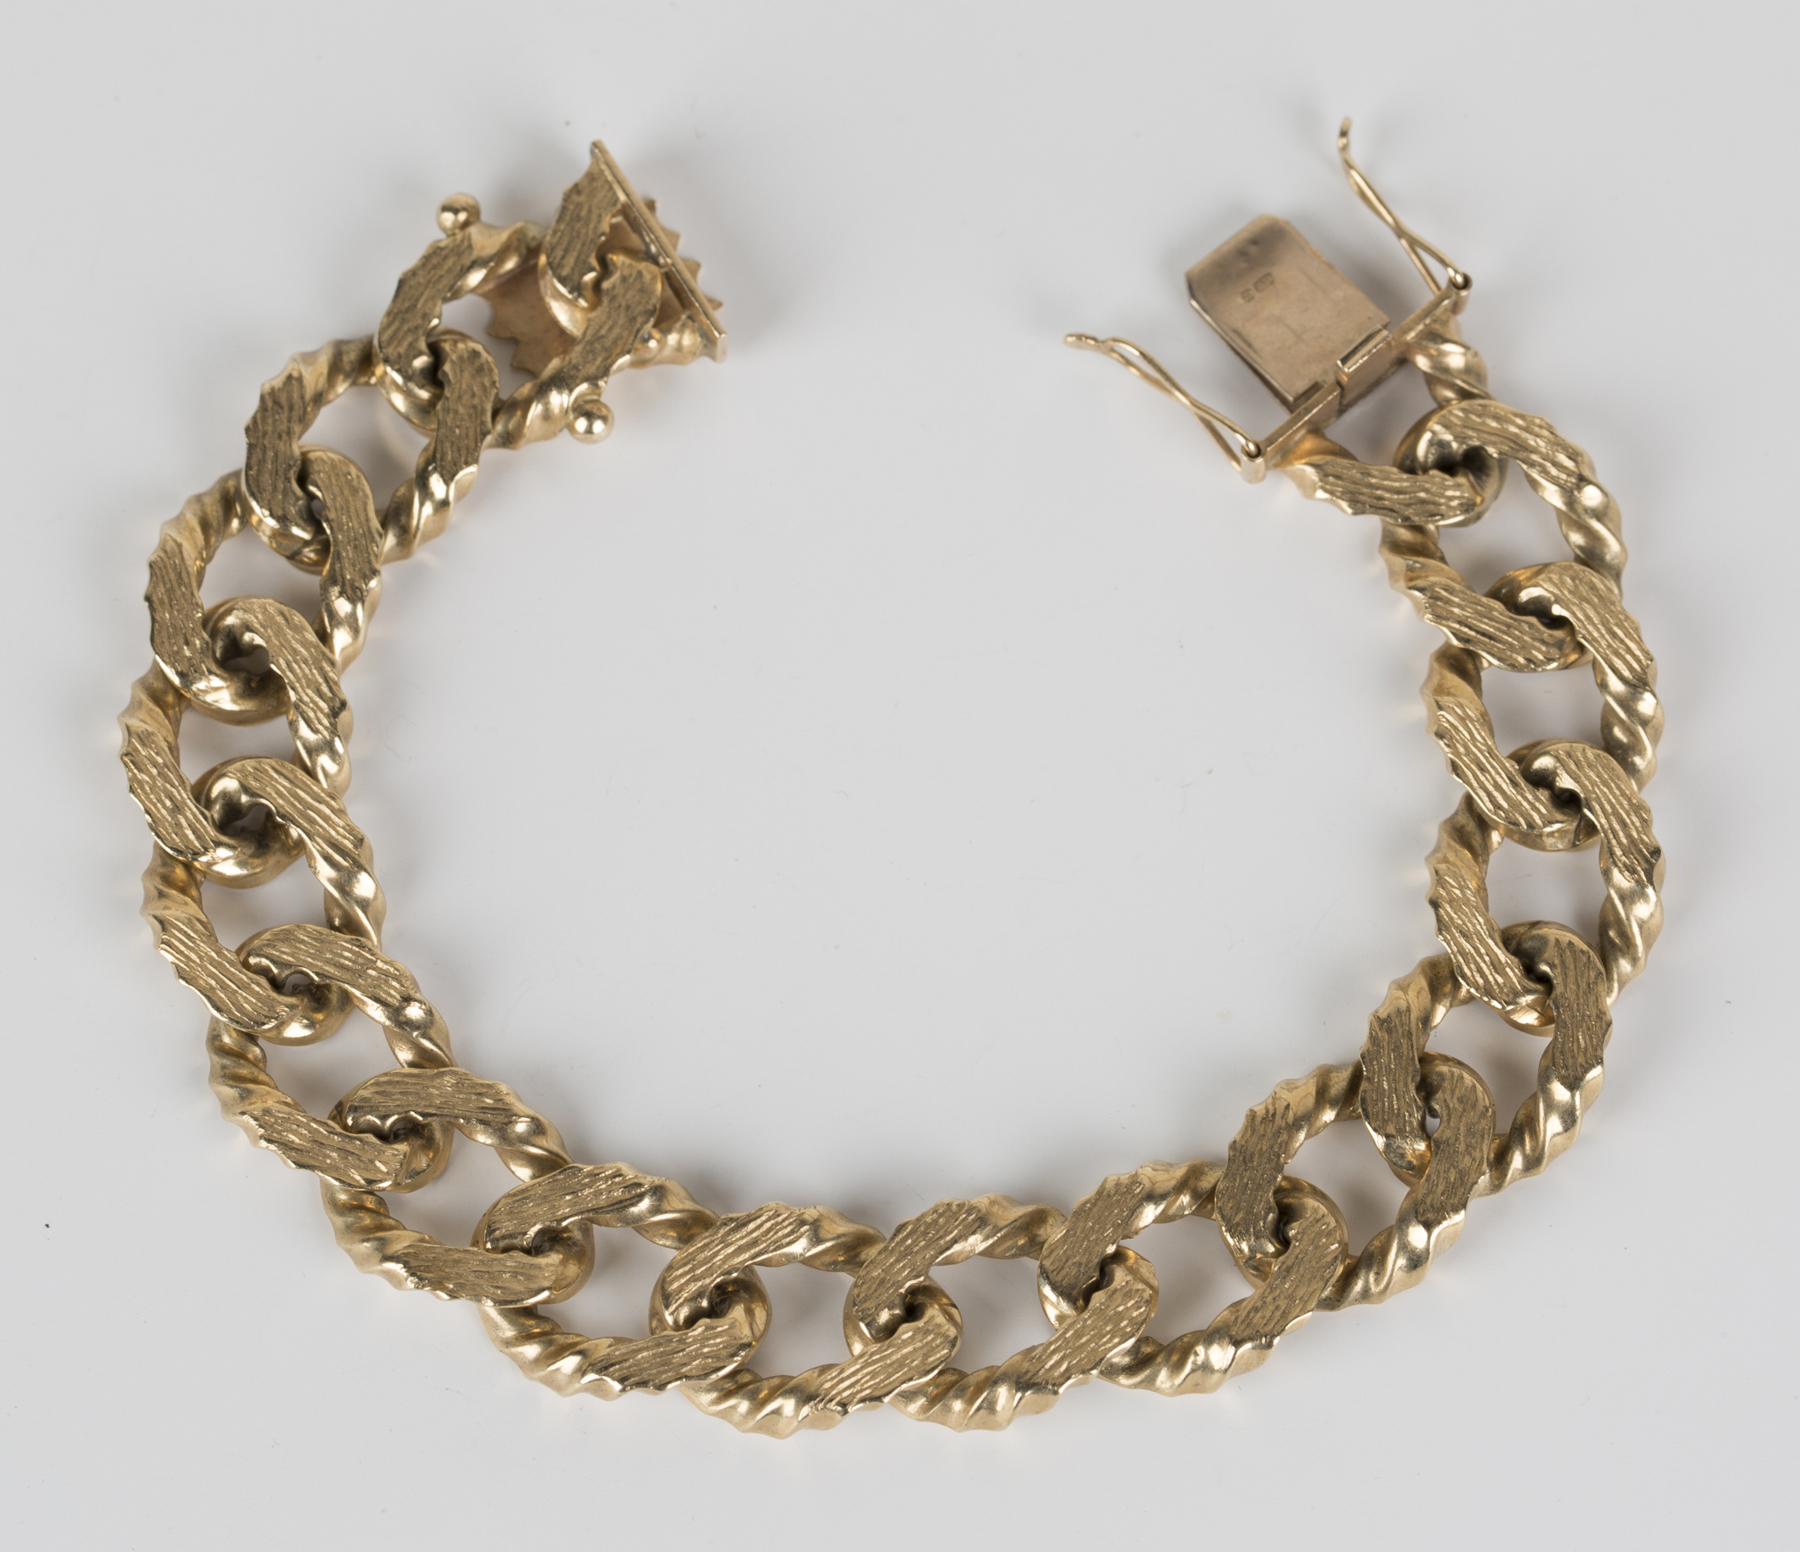 Download A 9ct gold curblink bracelet in a bark textured link ...